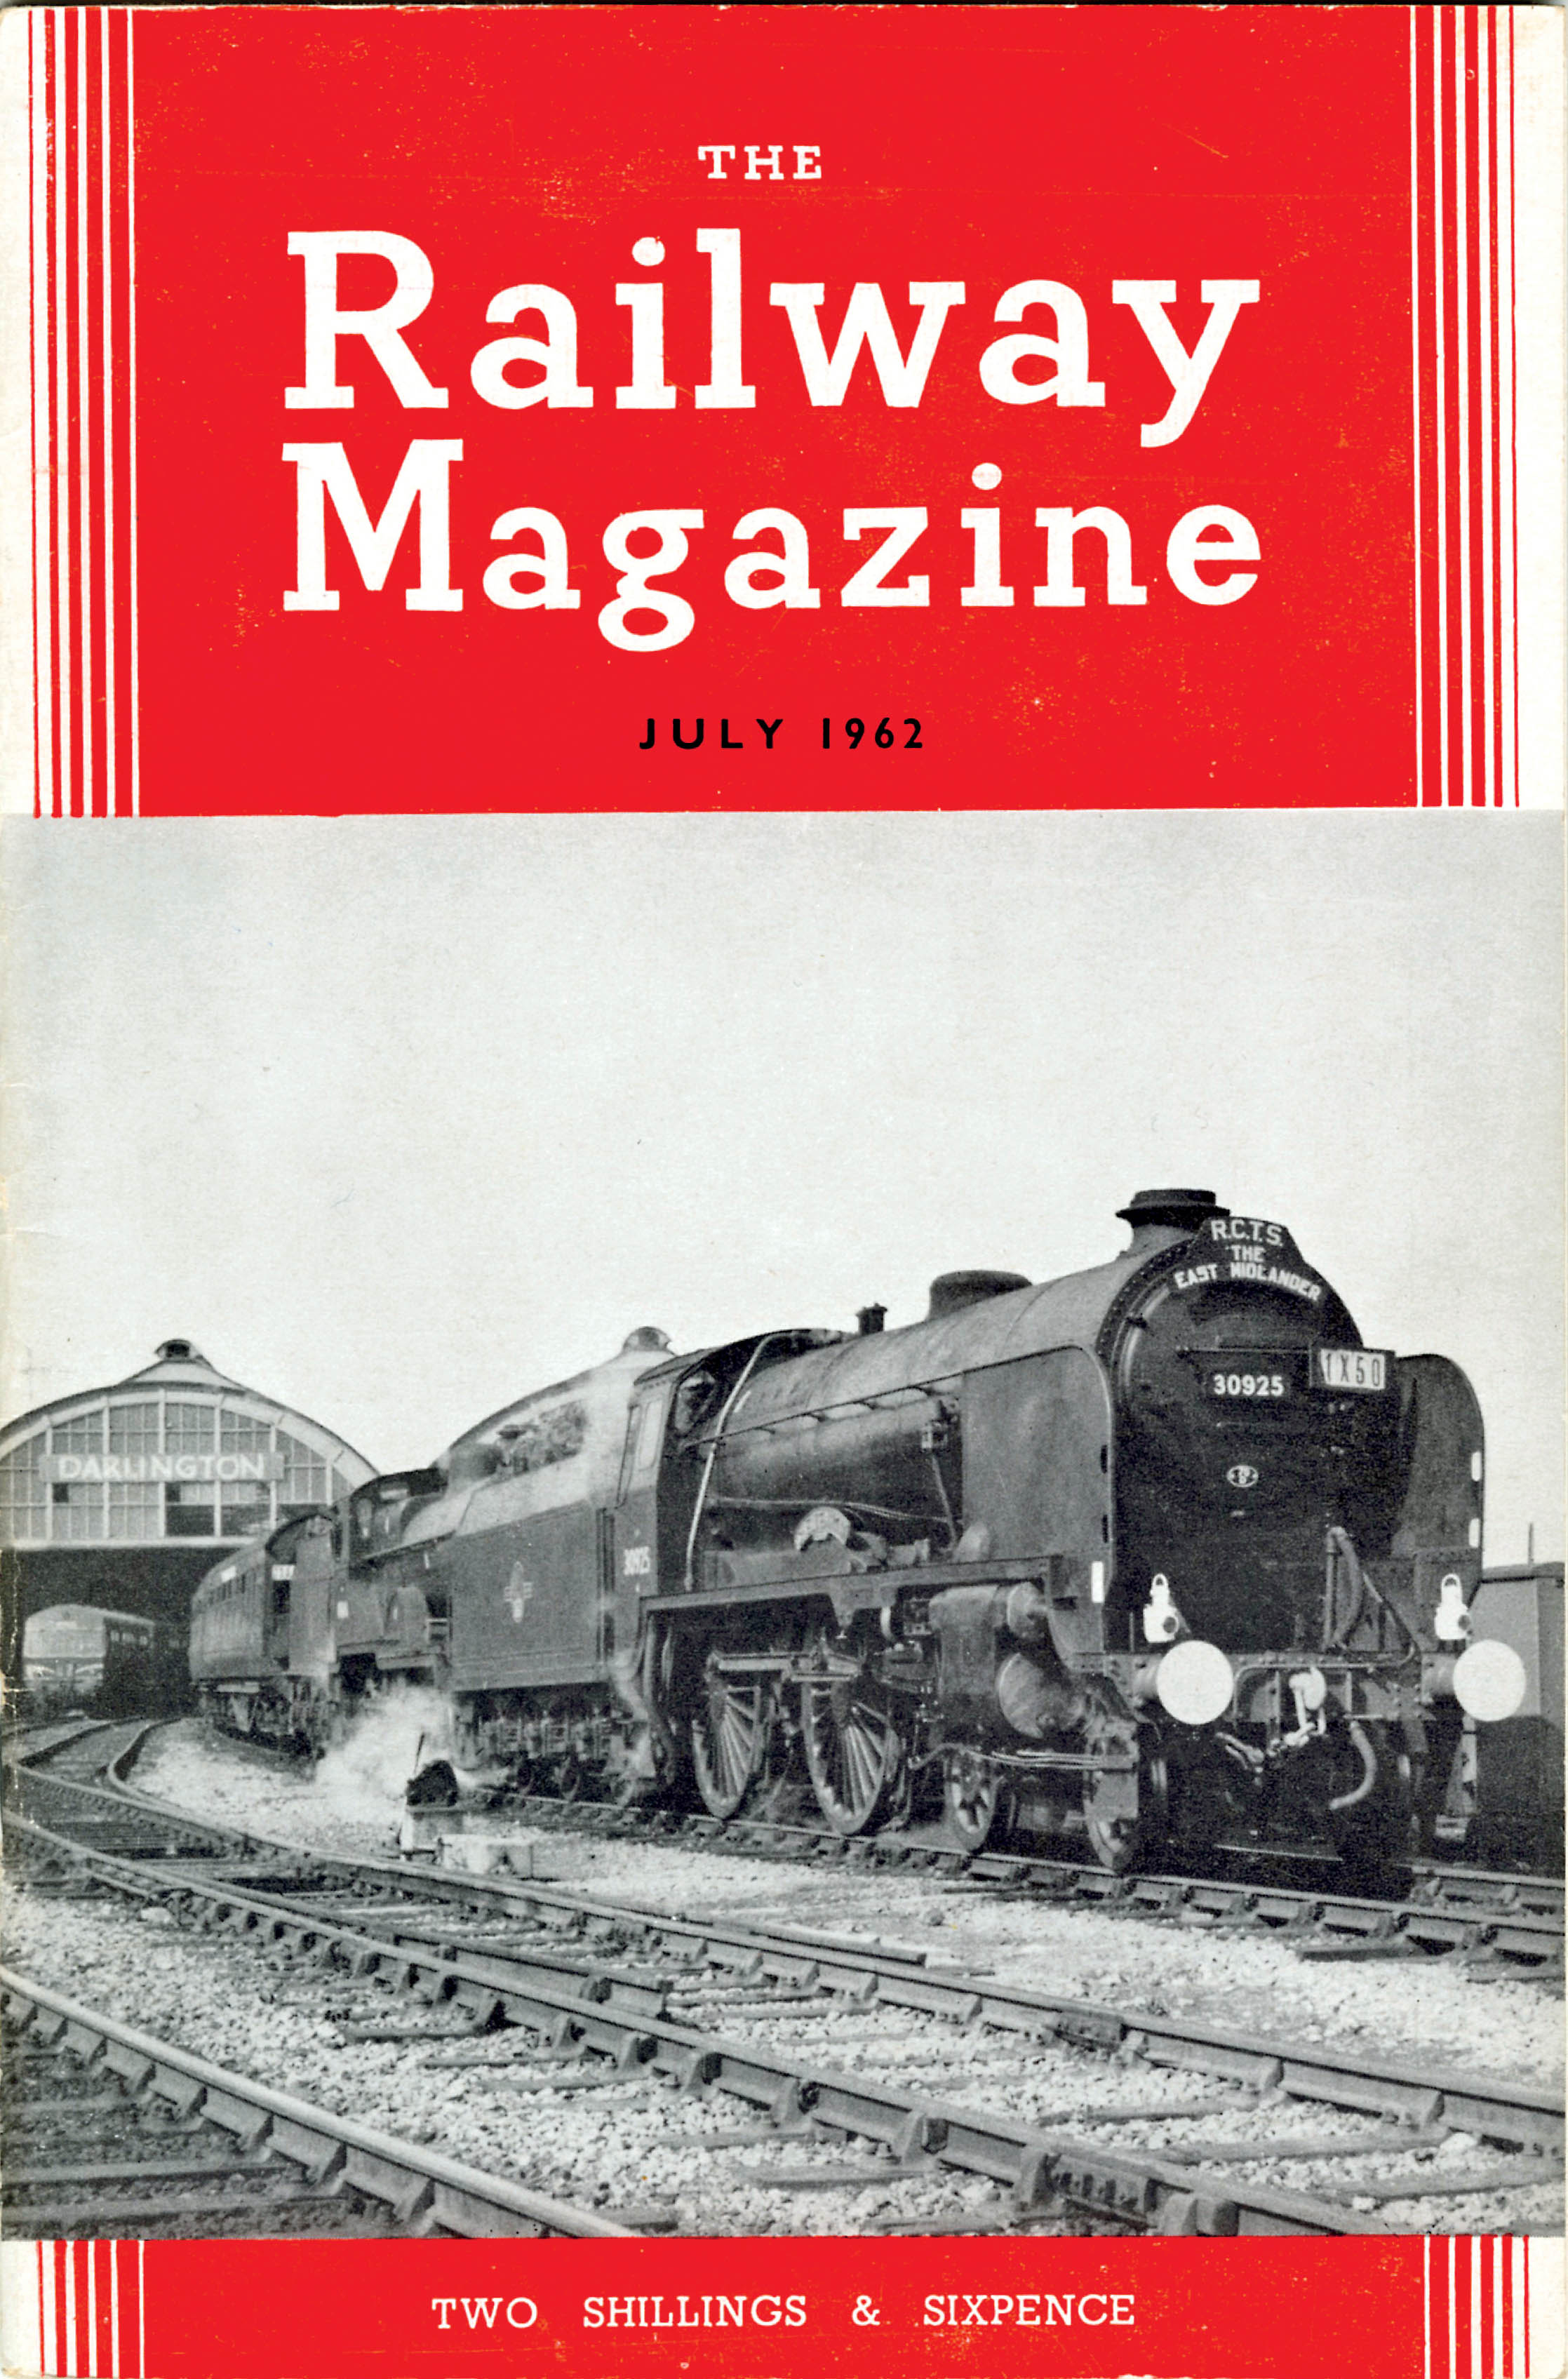 Front Cover of The Railway Magazine July 1962
R.C.T.S. “East Midlander” special train at Darlington Bank Top on May 13 before returning to Nottingham double-headed by 4-4-0 locomotives Nos. 30925, “Cheltenham,” and 40646  I.S. Carr, courtesy Chris Milner, editor The Railway Magazine